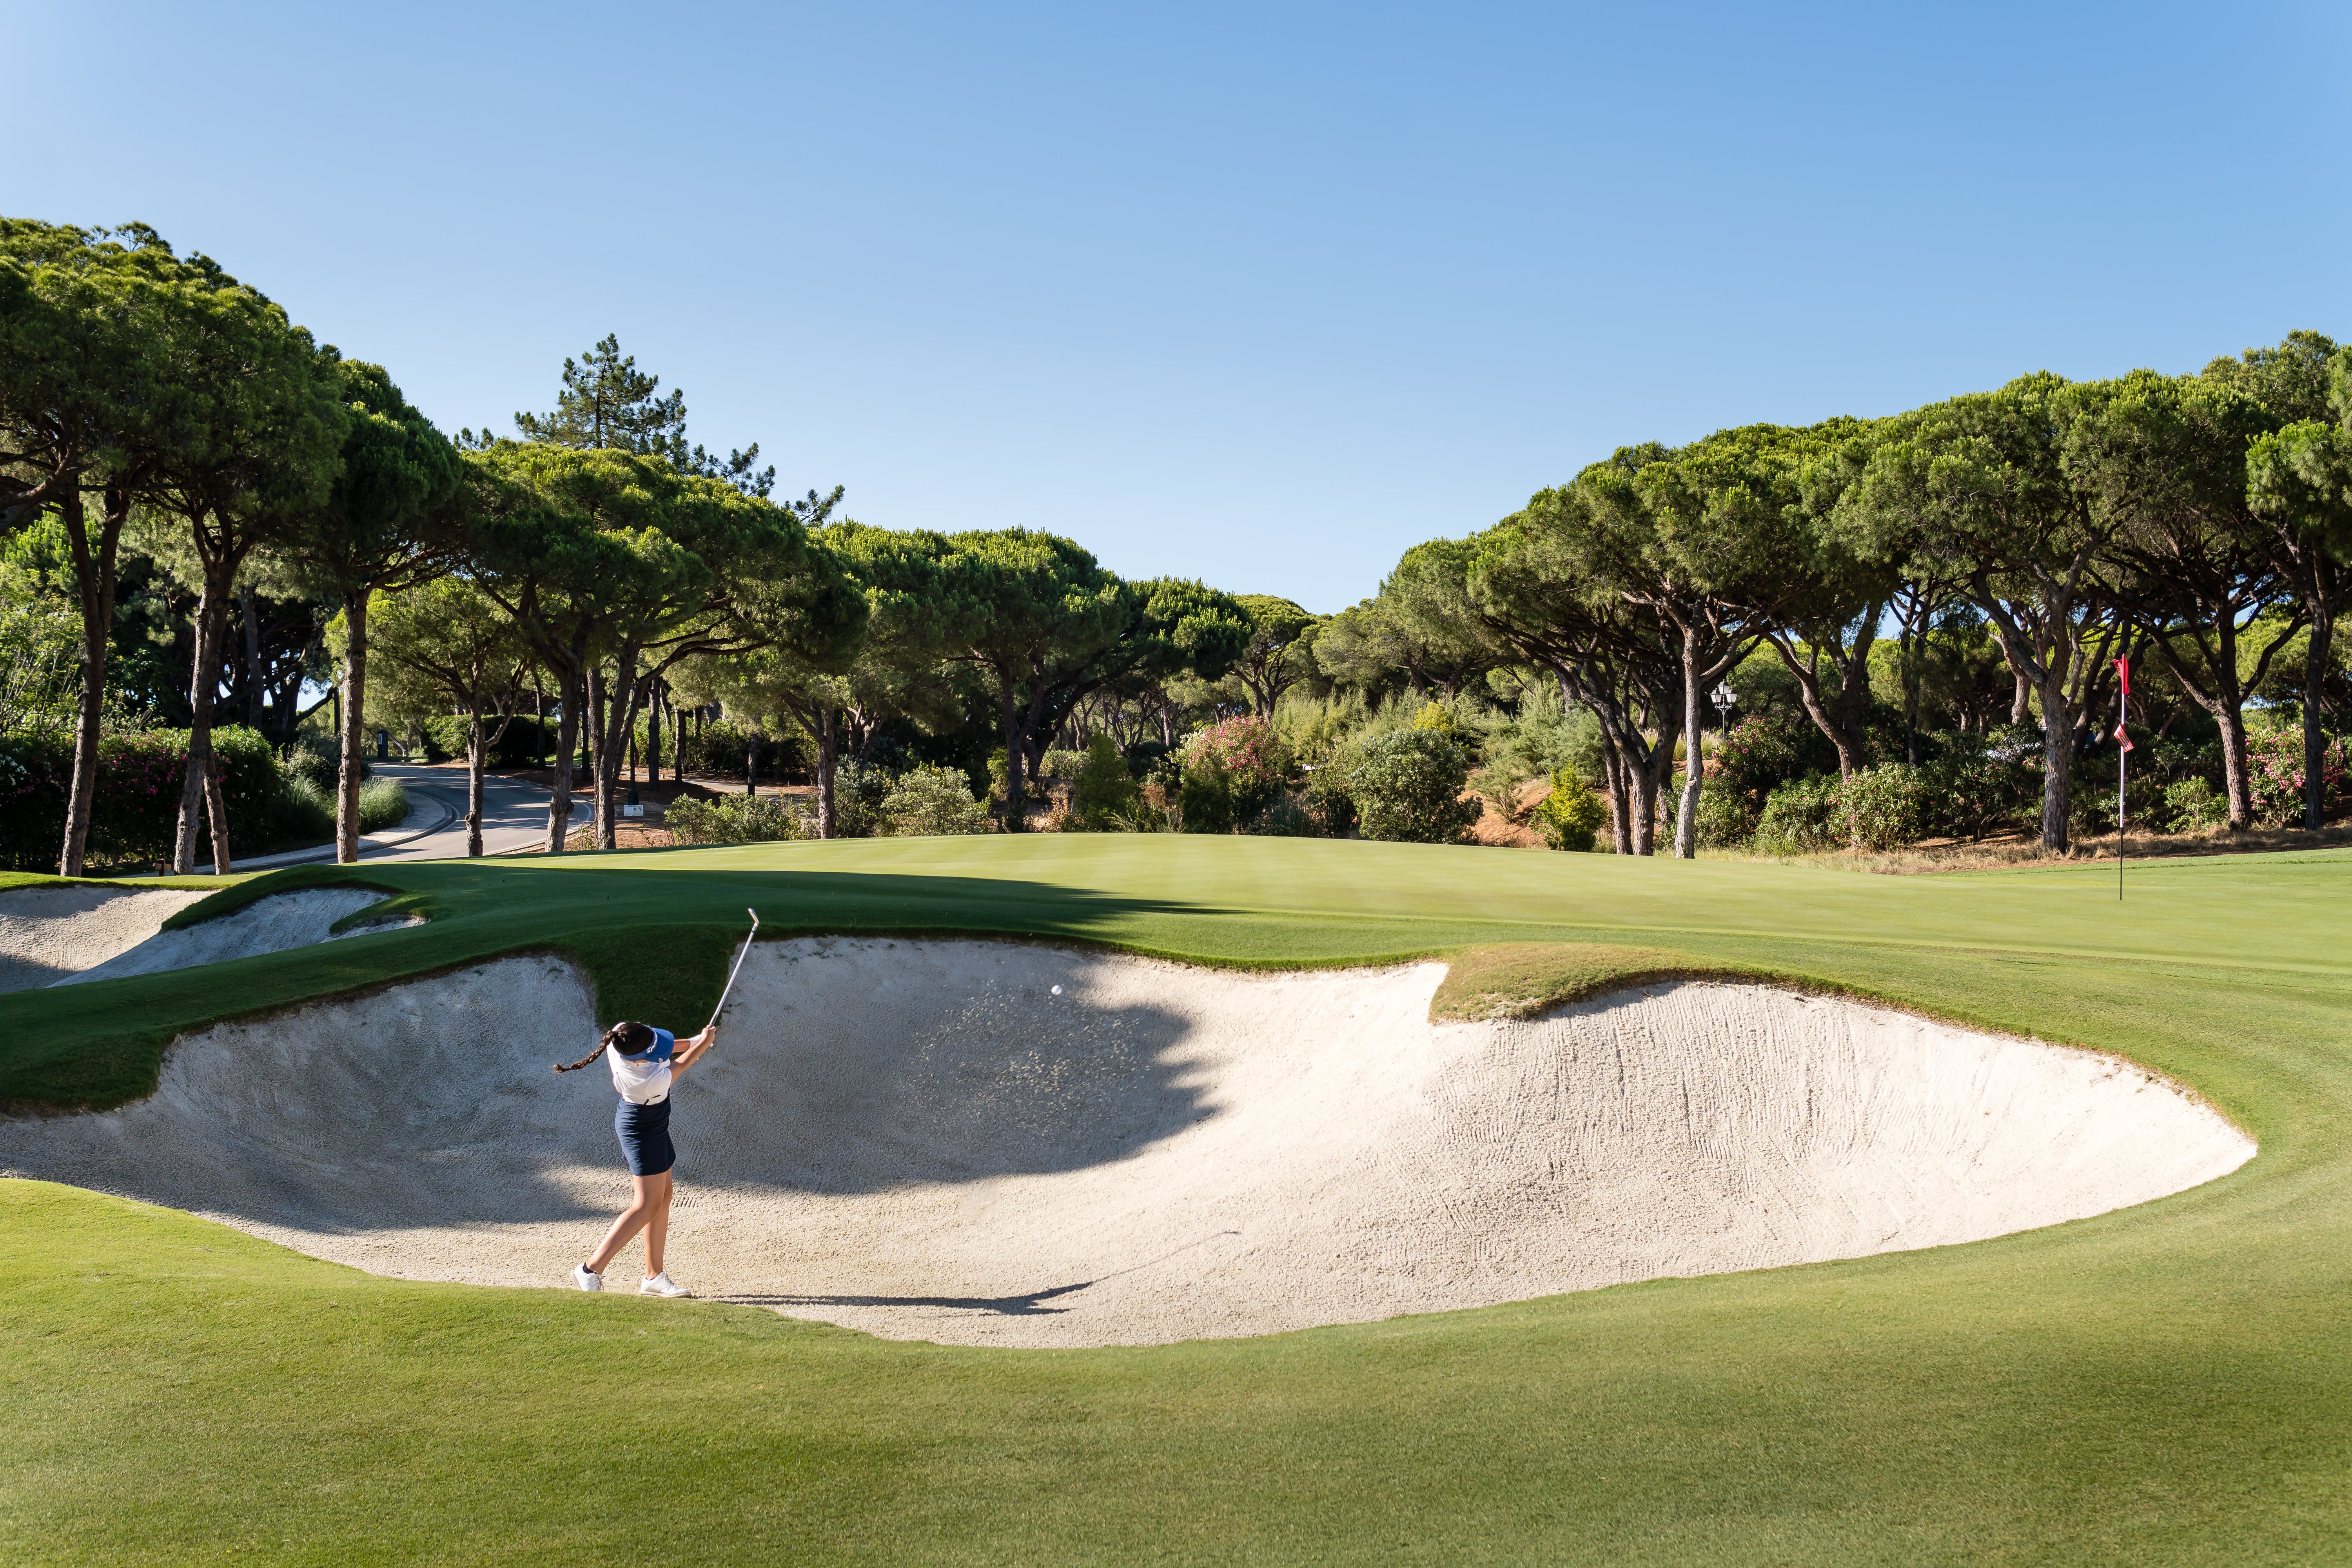 With over 40 courses set amid stunning scenery, it’s no wonder golfers flock to the Algarve